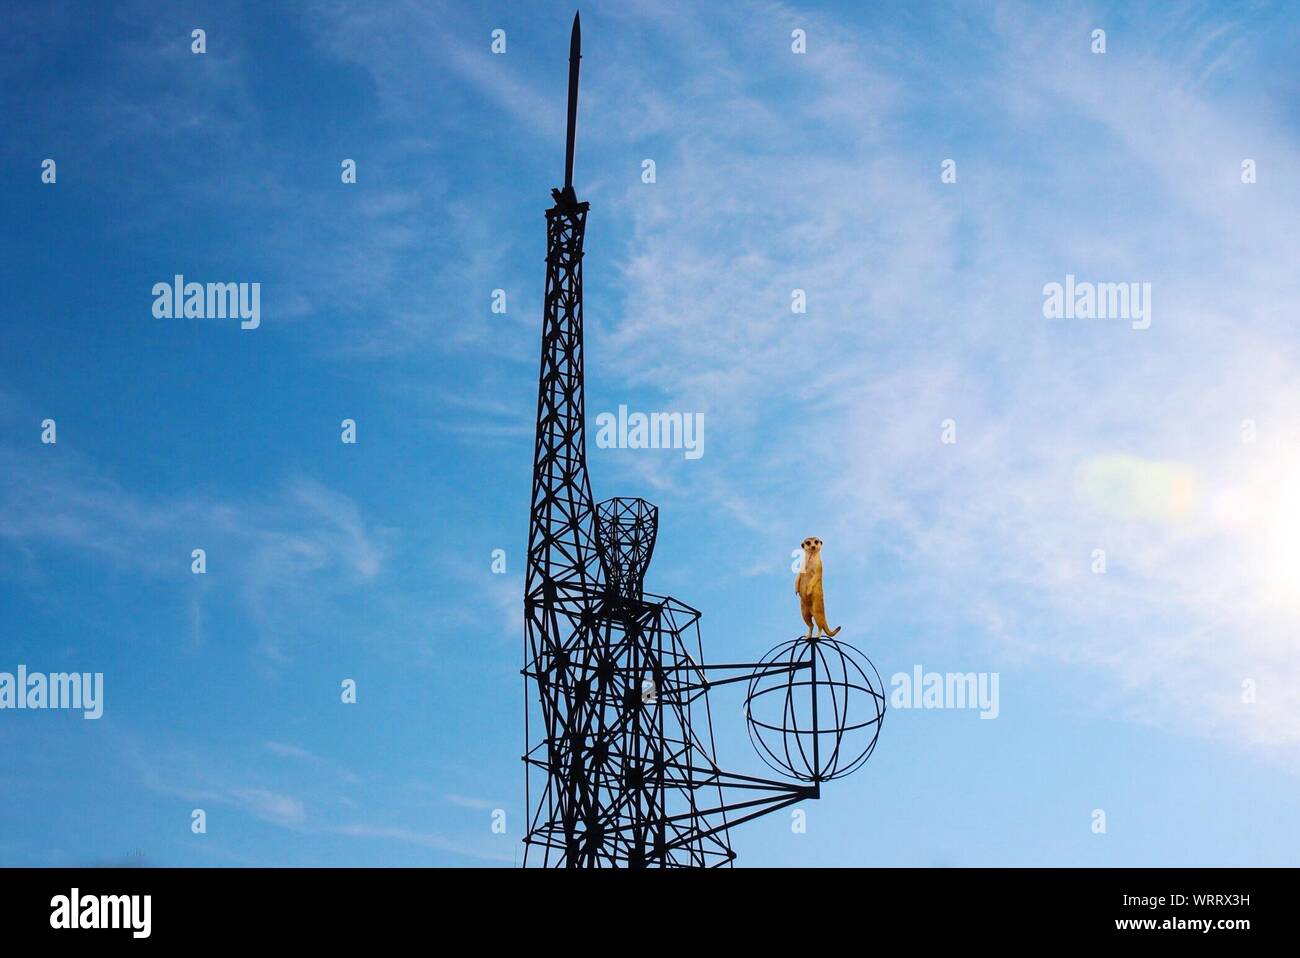 Low Angle View Of Meerkat Statue On Globe Of Human Sculpture Stock Photo